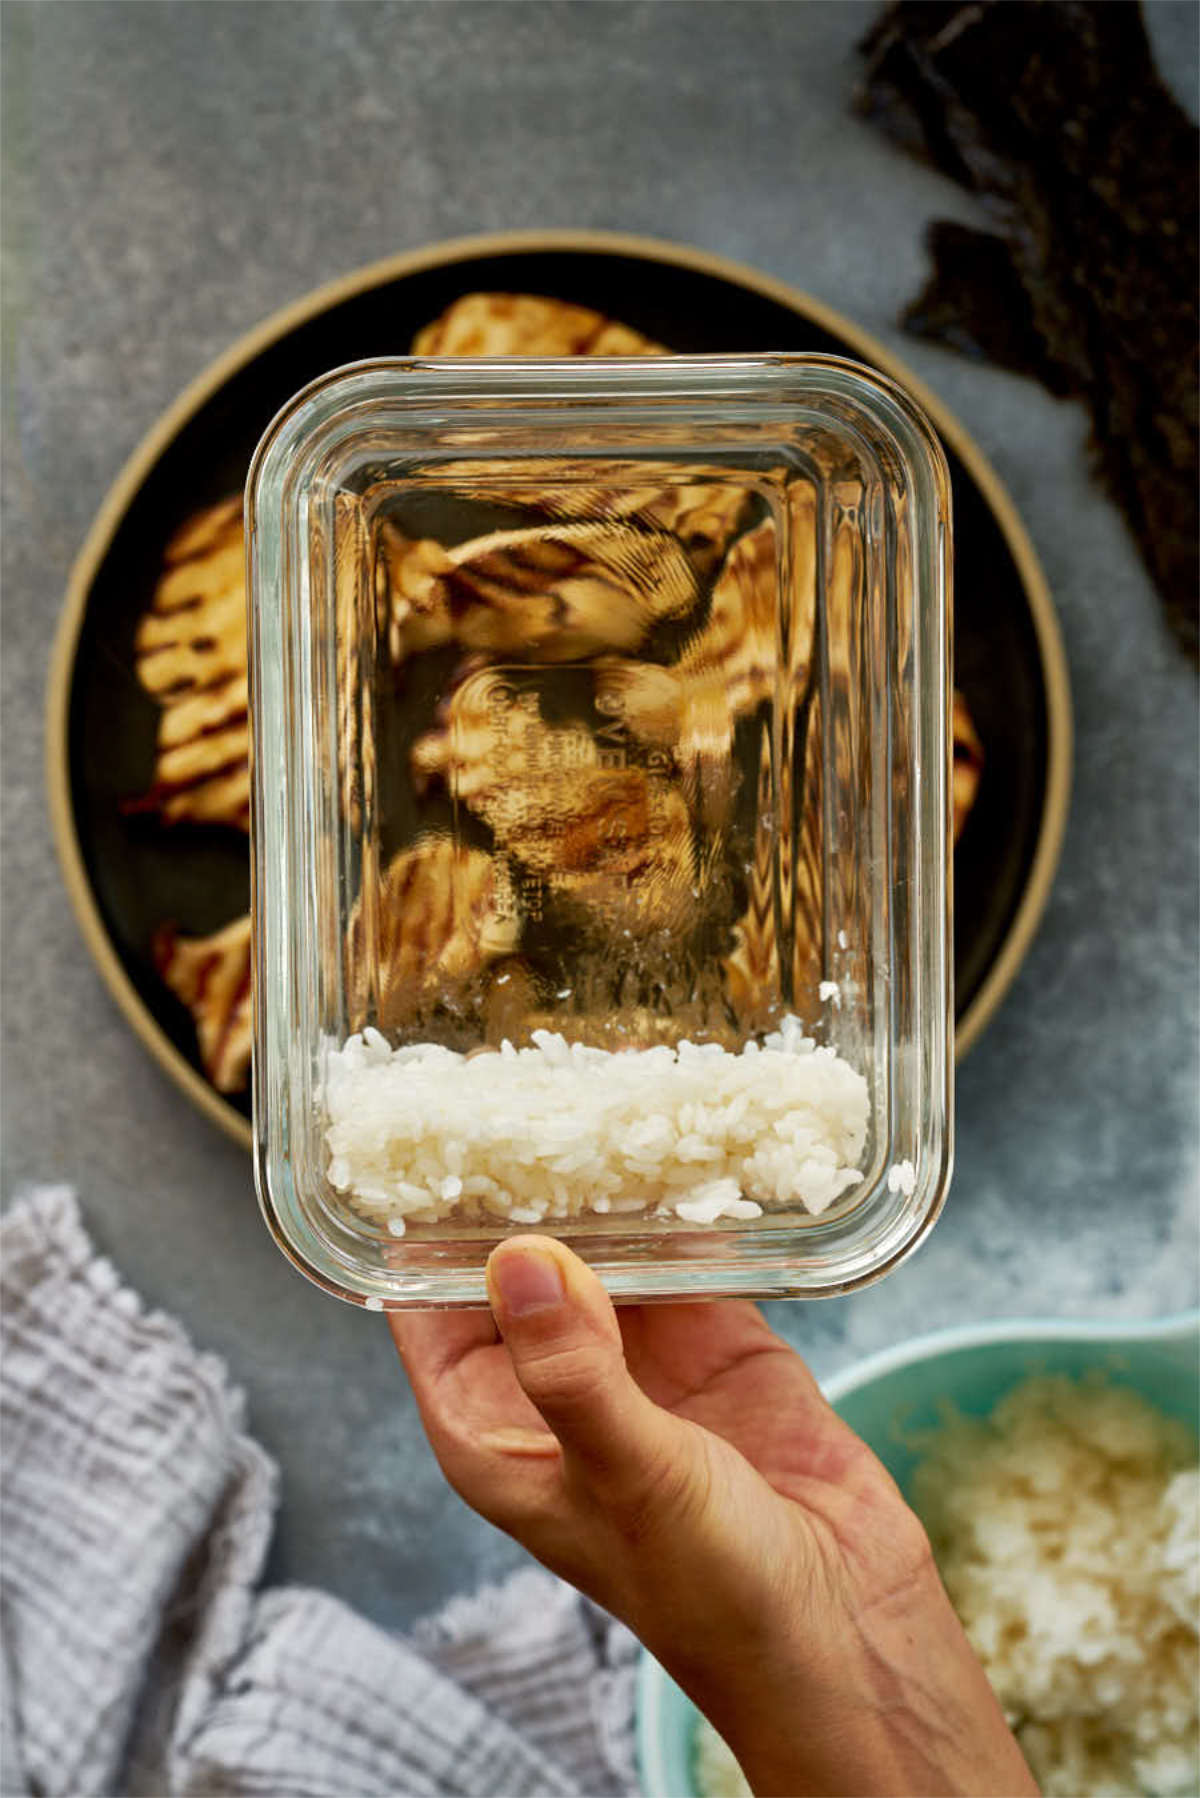 Rice on the side of a glass dish.